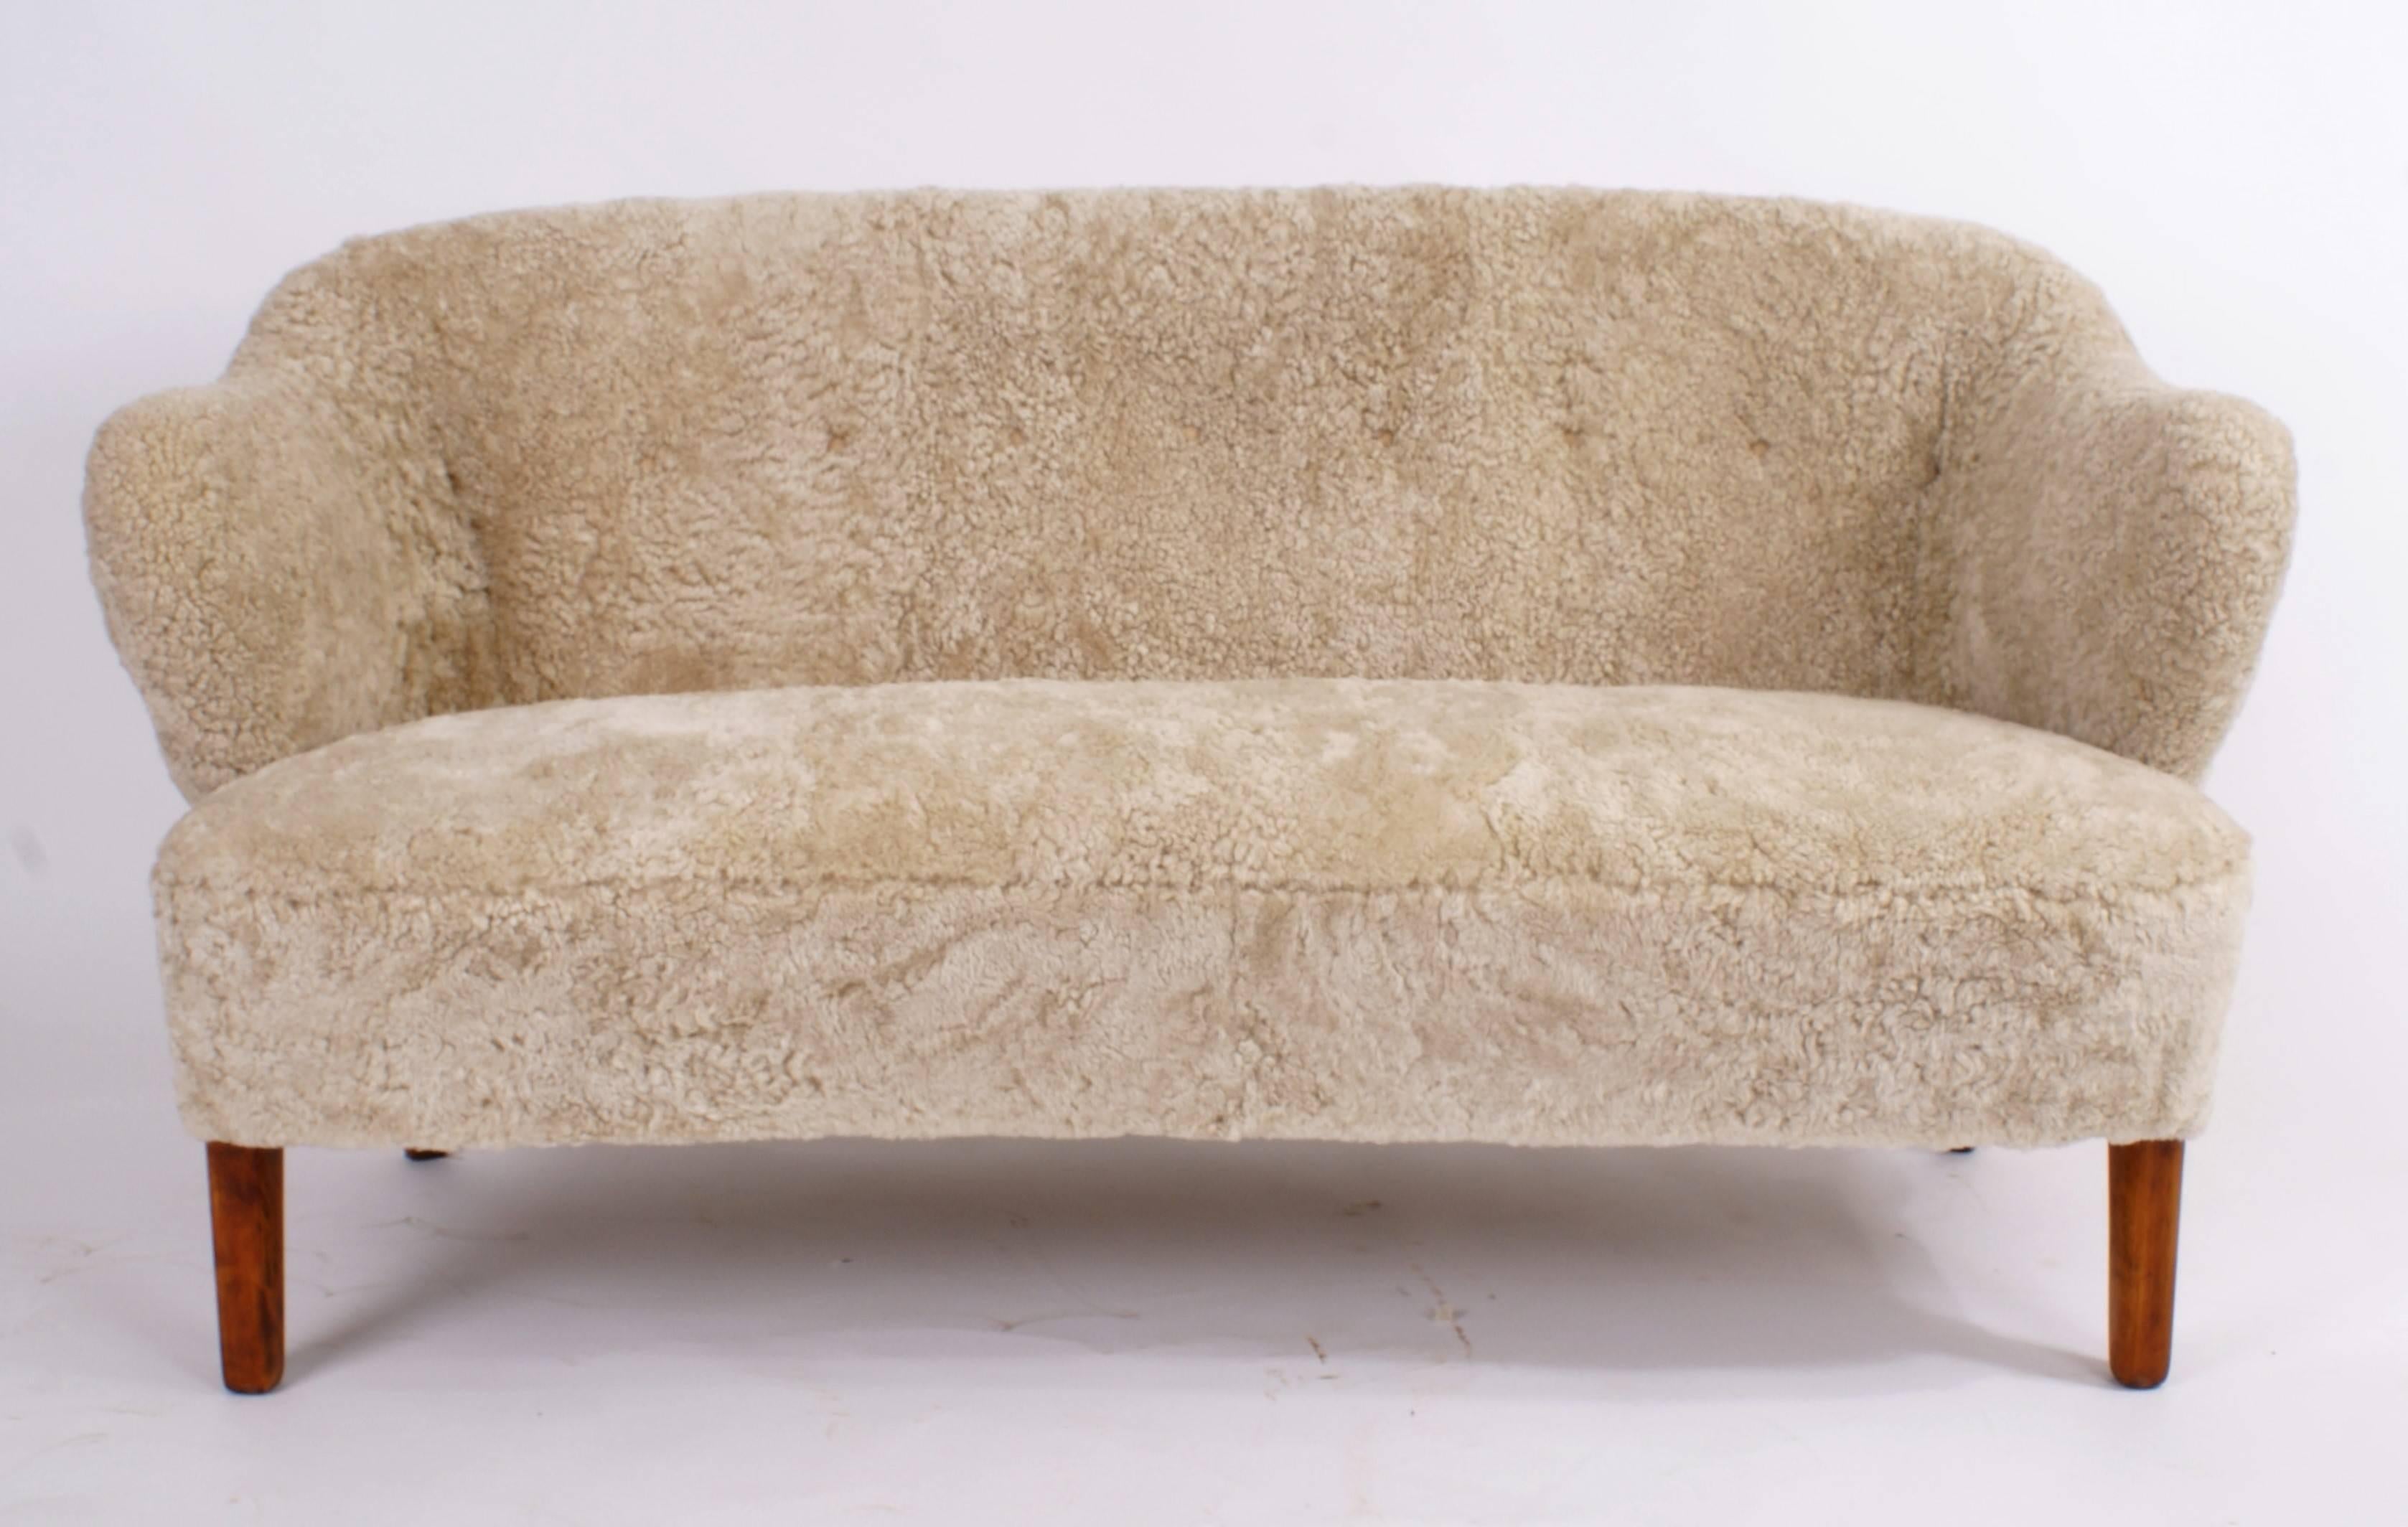 Flemming Lassen, two-seat settee for master cabinetmaker Jacob Kjær, Copenhagen. Beige sheepskin upholstery and ash legs. Designed, 1940.

Please view 1stdibs item reference number LU1081226686162 for a pair of Flemming Lassen easy chairs that match